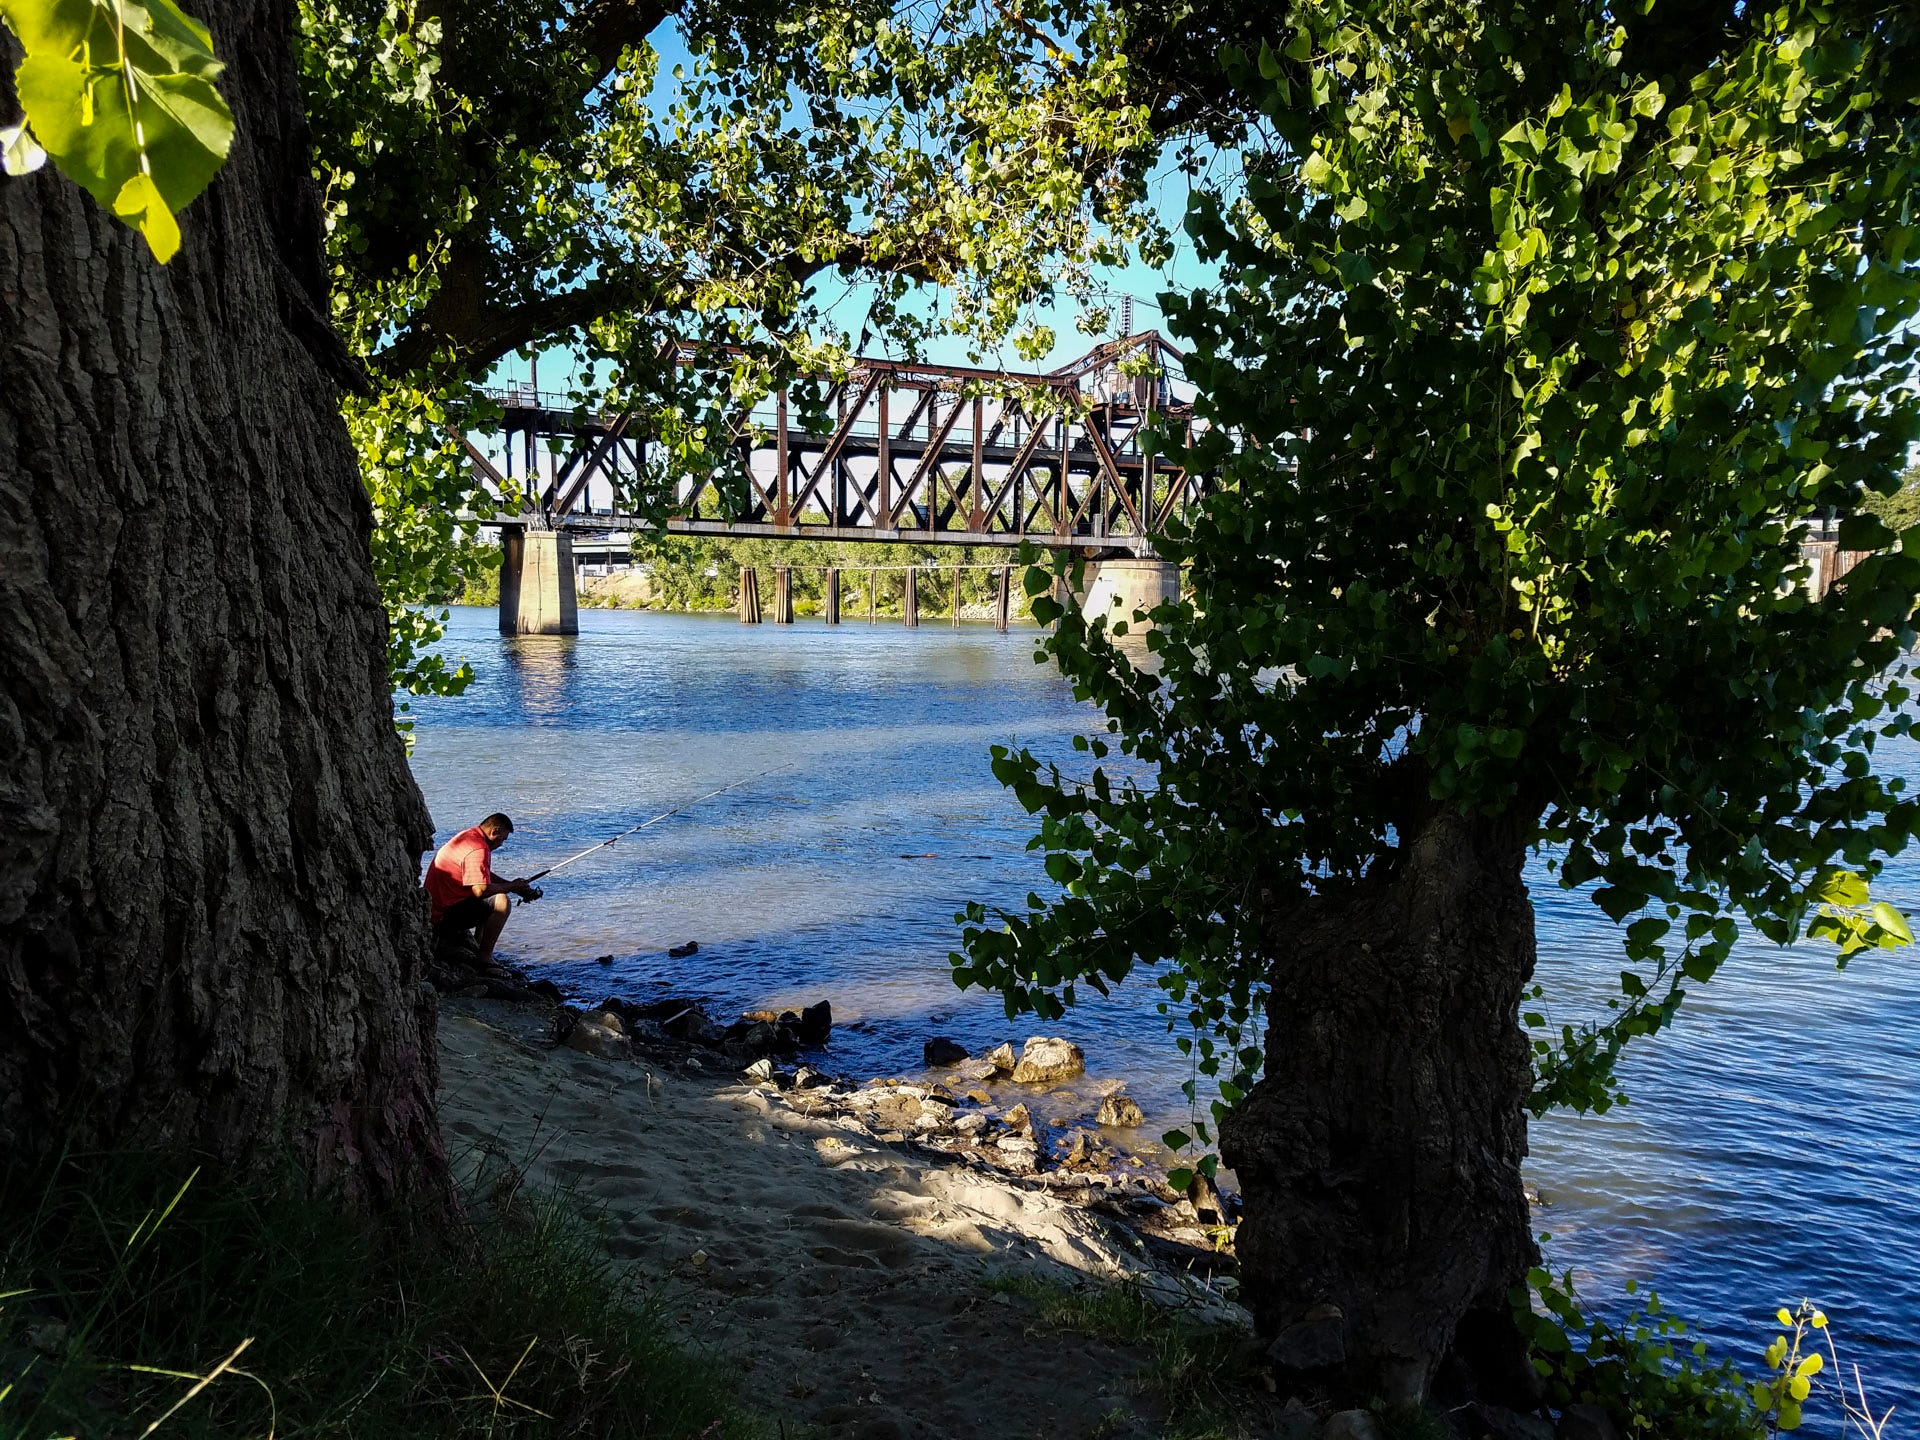 A man sits on a log (or something) and fishes on the sandy riverbanks of the Sacramento River. Large trees grow right up to the riverbank and provide shade. In the background, an old trestle style railbridge crosses the river.